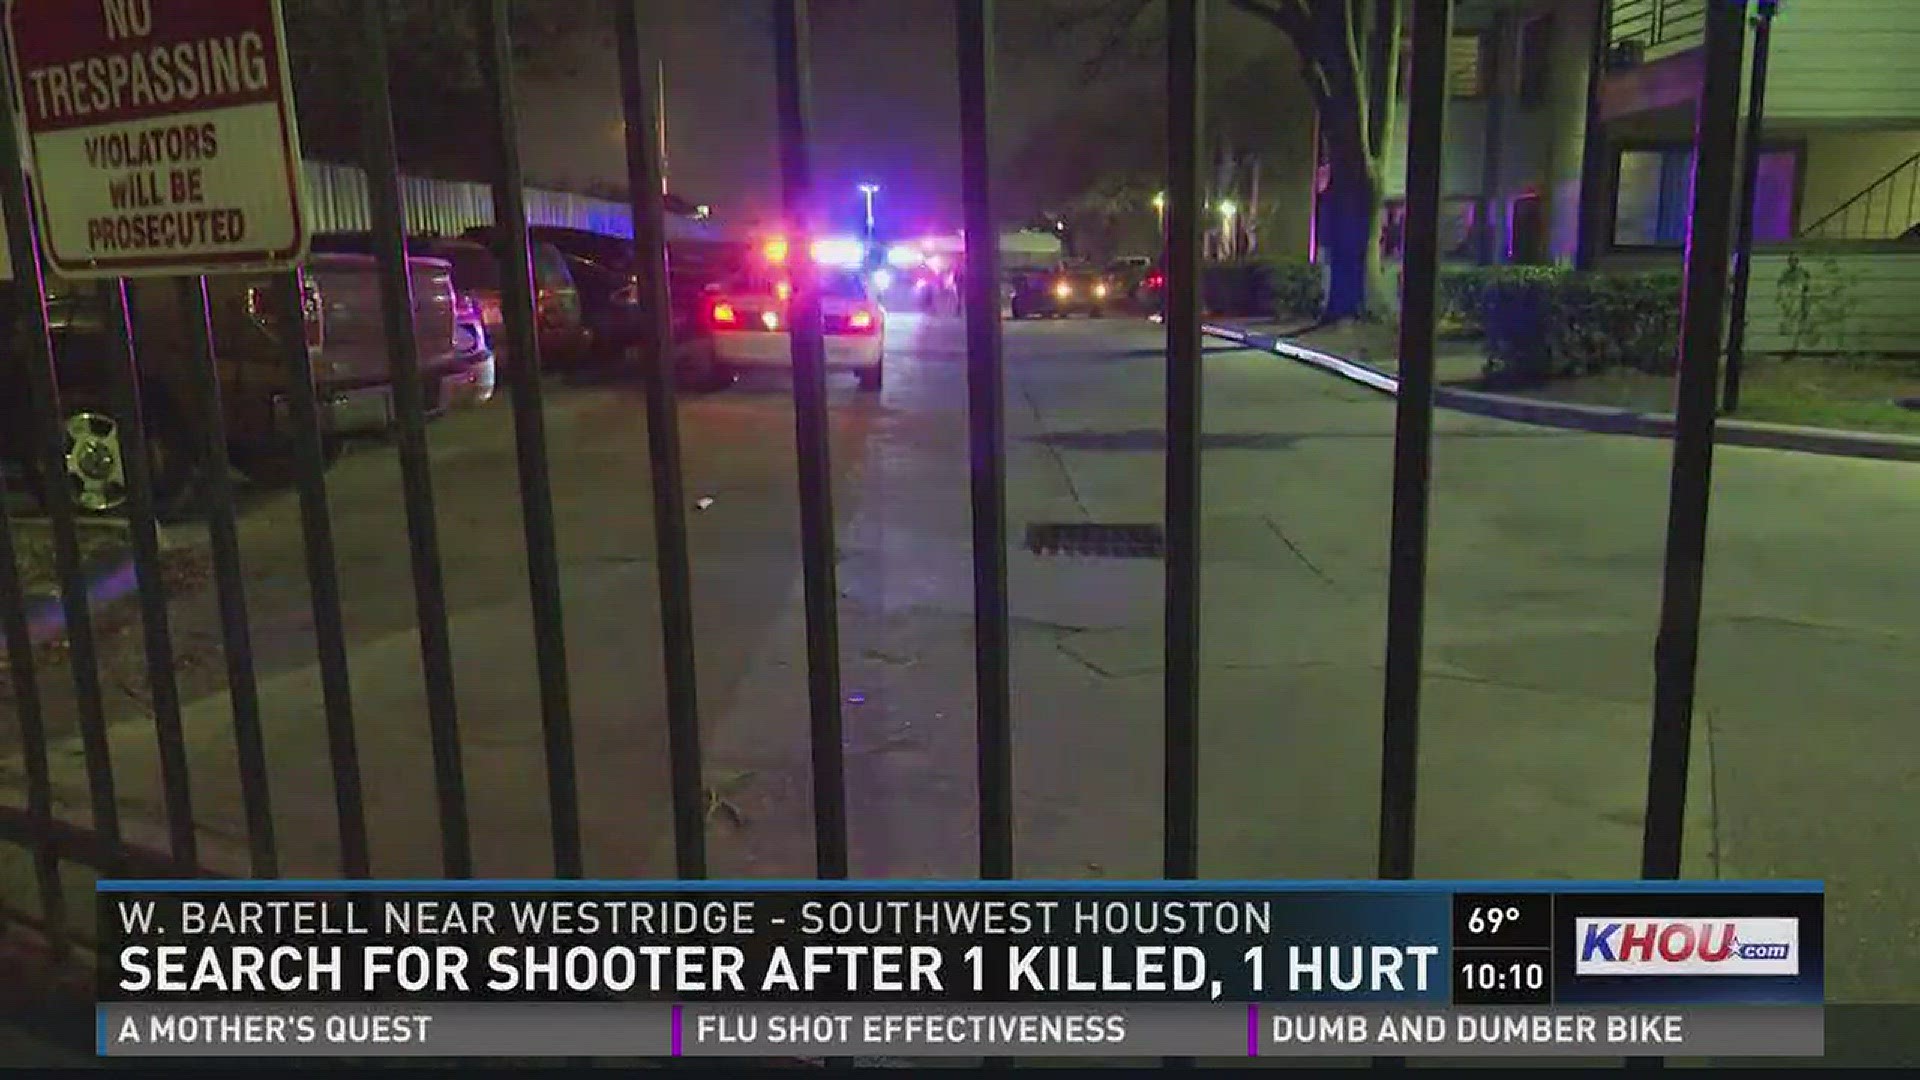 One person died and another was injured following a shooting Thursday night in southwest Houston.